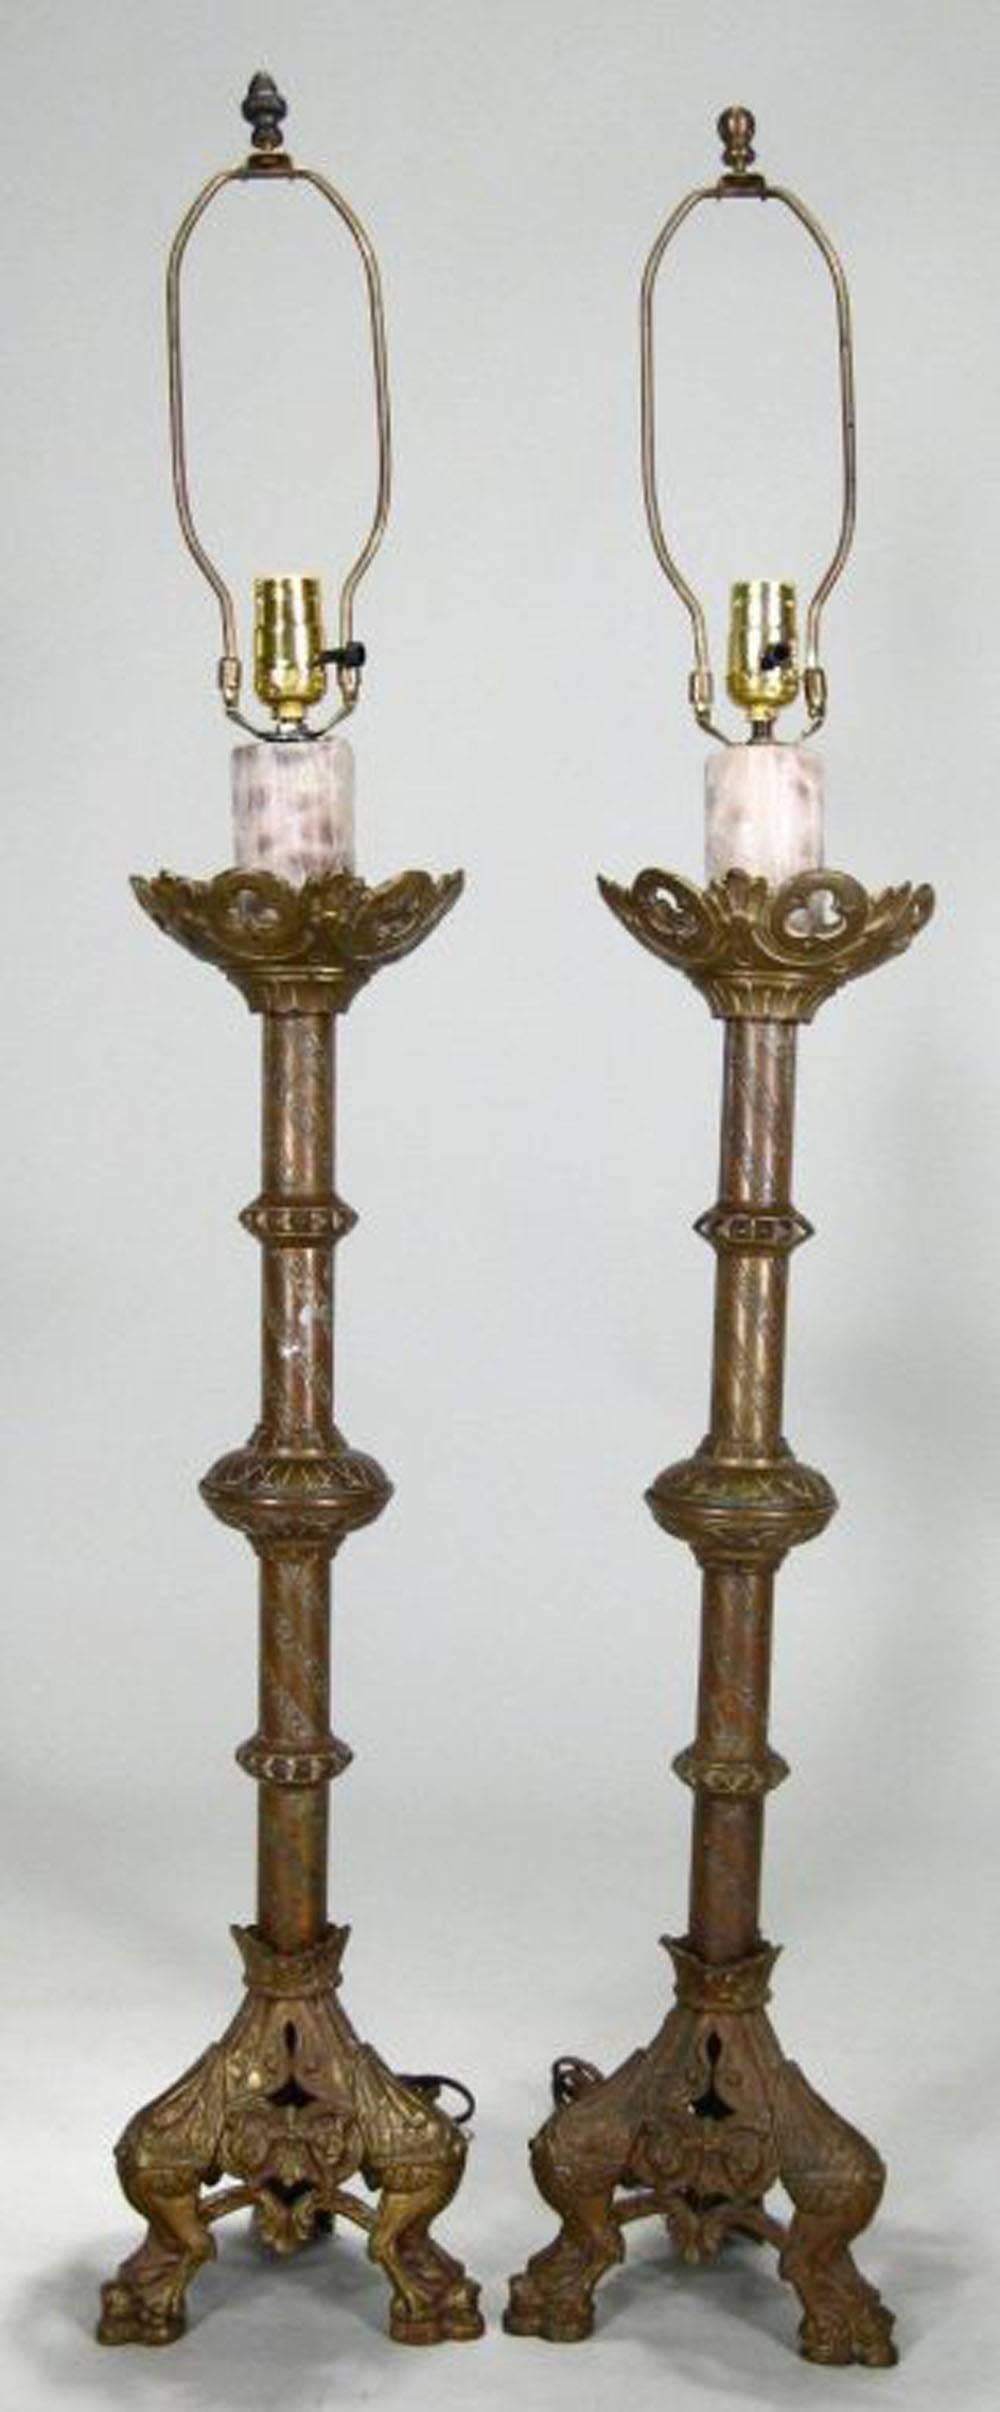 Pair of Gothic style brass lamps with lion mask feet, traces of gilding.